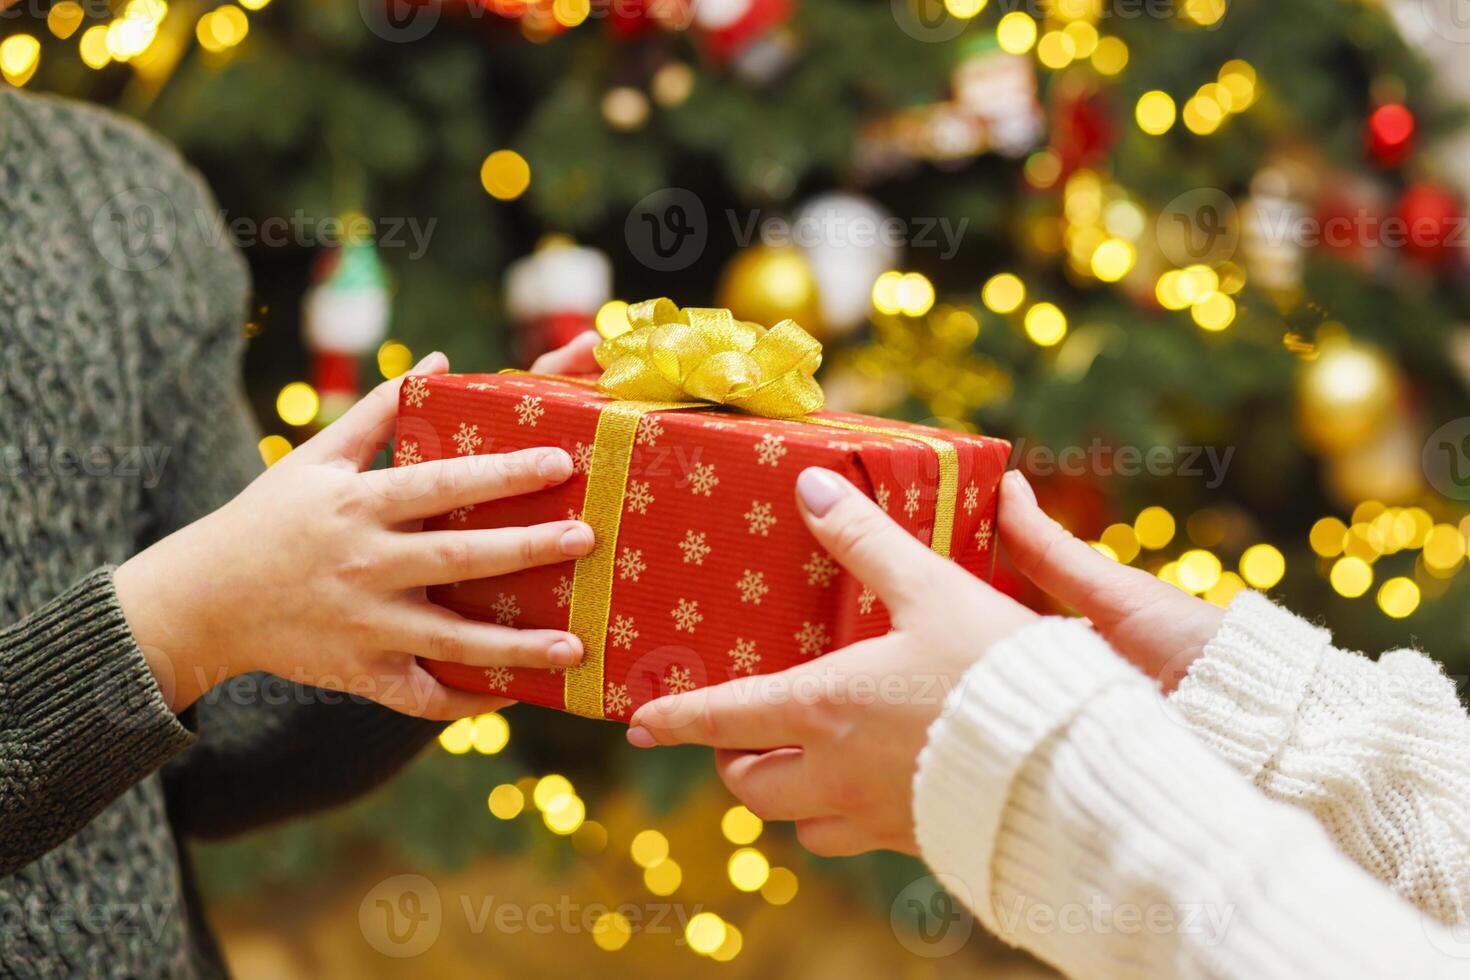 Hands of parent giving Christmas gift to child on Christmas tree background photo